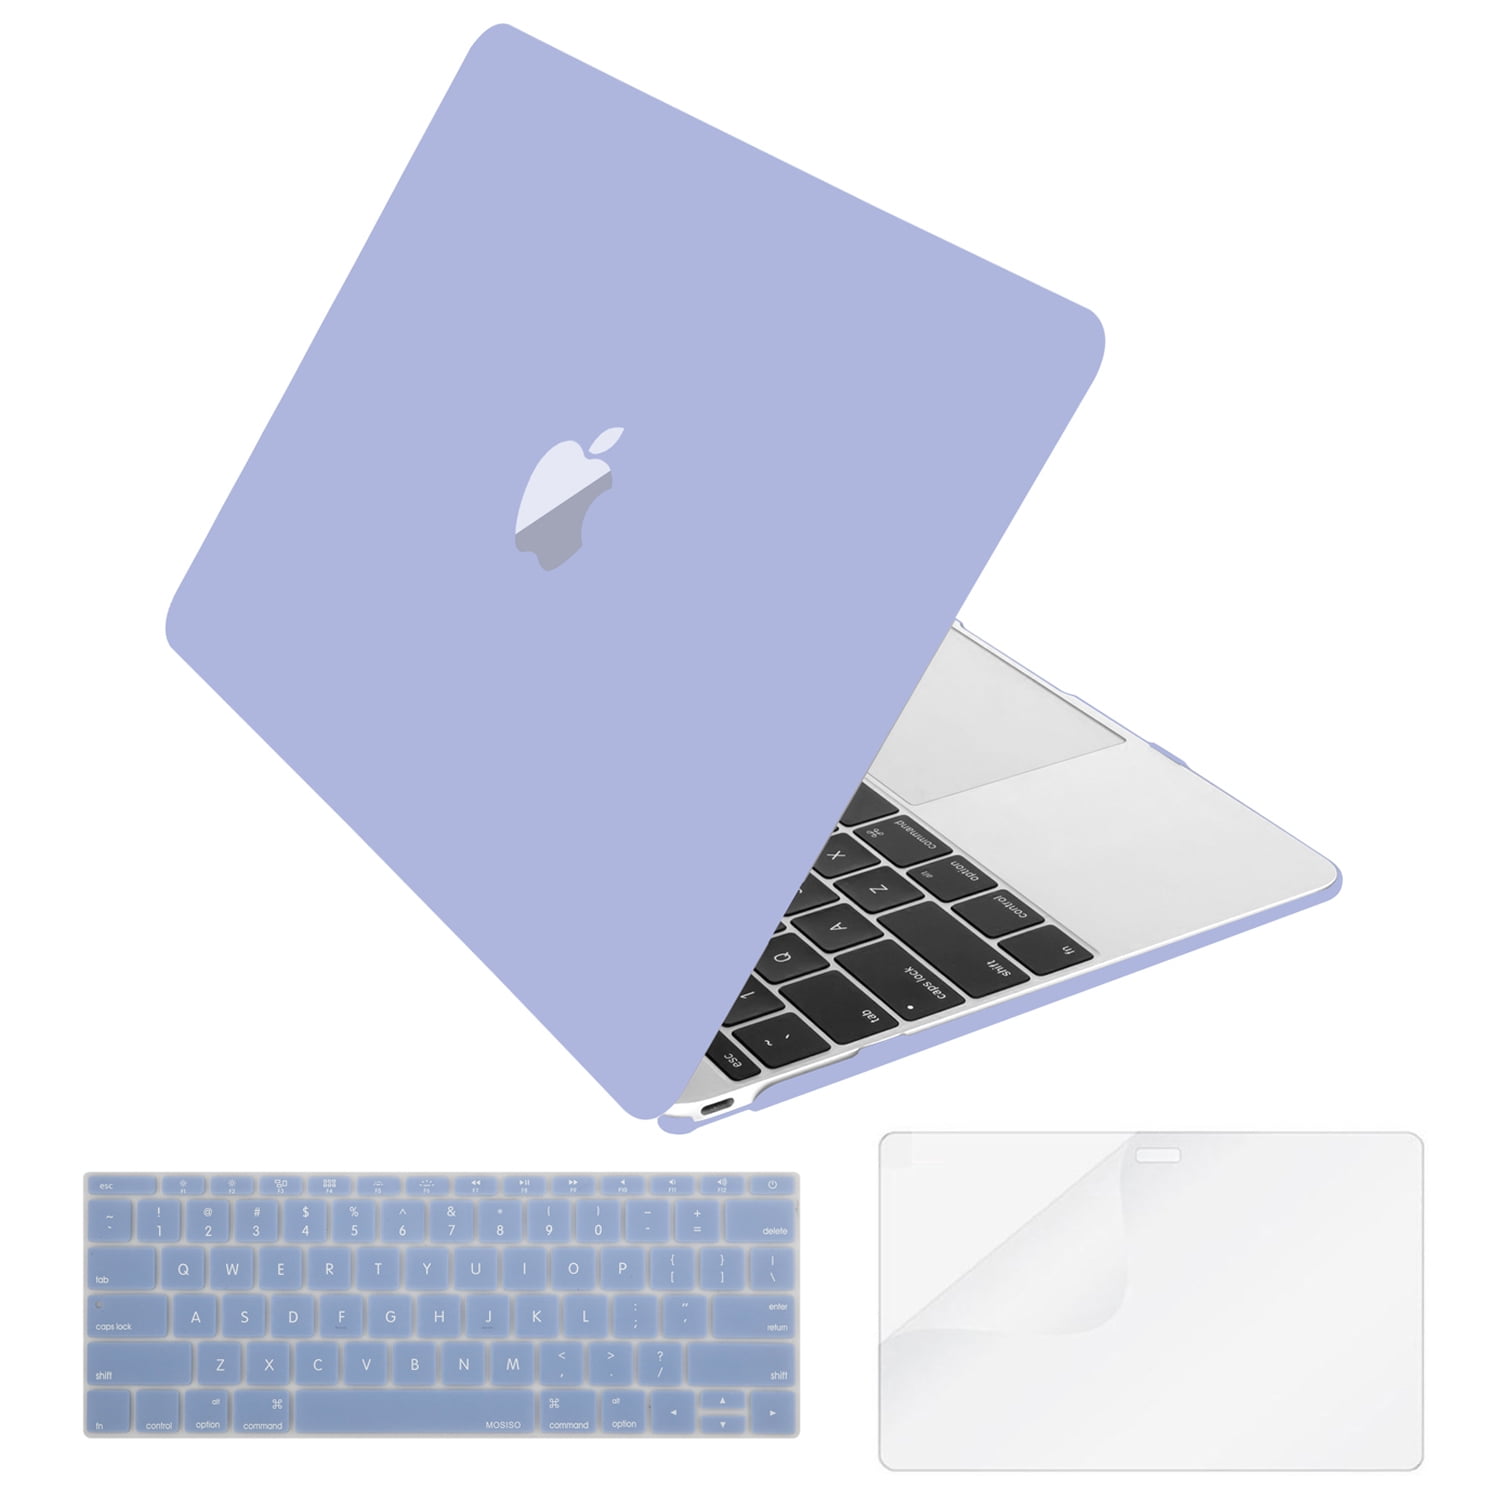 Hard Shell Case with matching KEYBOARD Skin and NEOPRENE Sleeve Cover for 12-inch Apple MacBook A1534 frosted 2015 Model Importado de UK LOVE MY CASE / BUNDLE CLEAR , NOT compatible with Pro or Air 